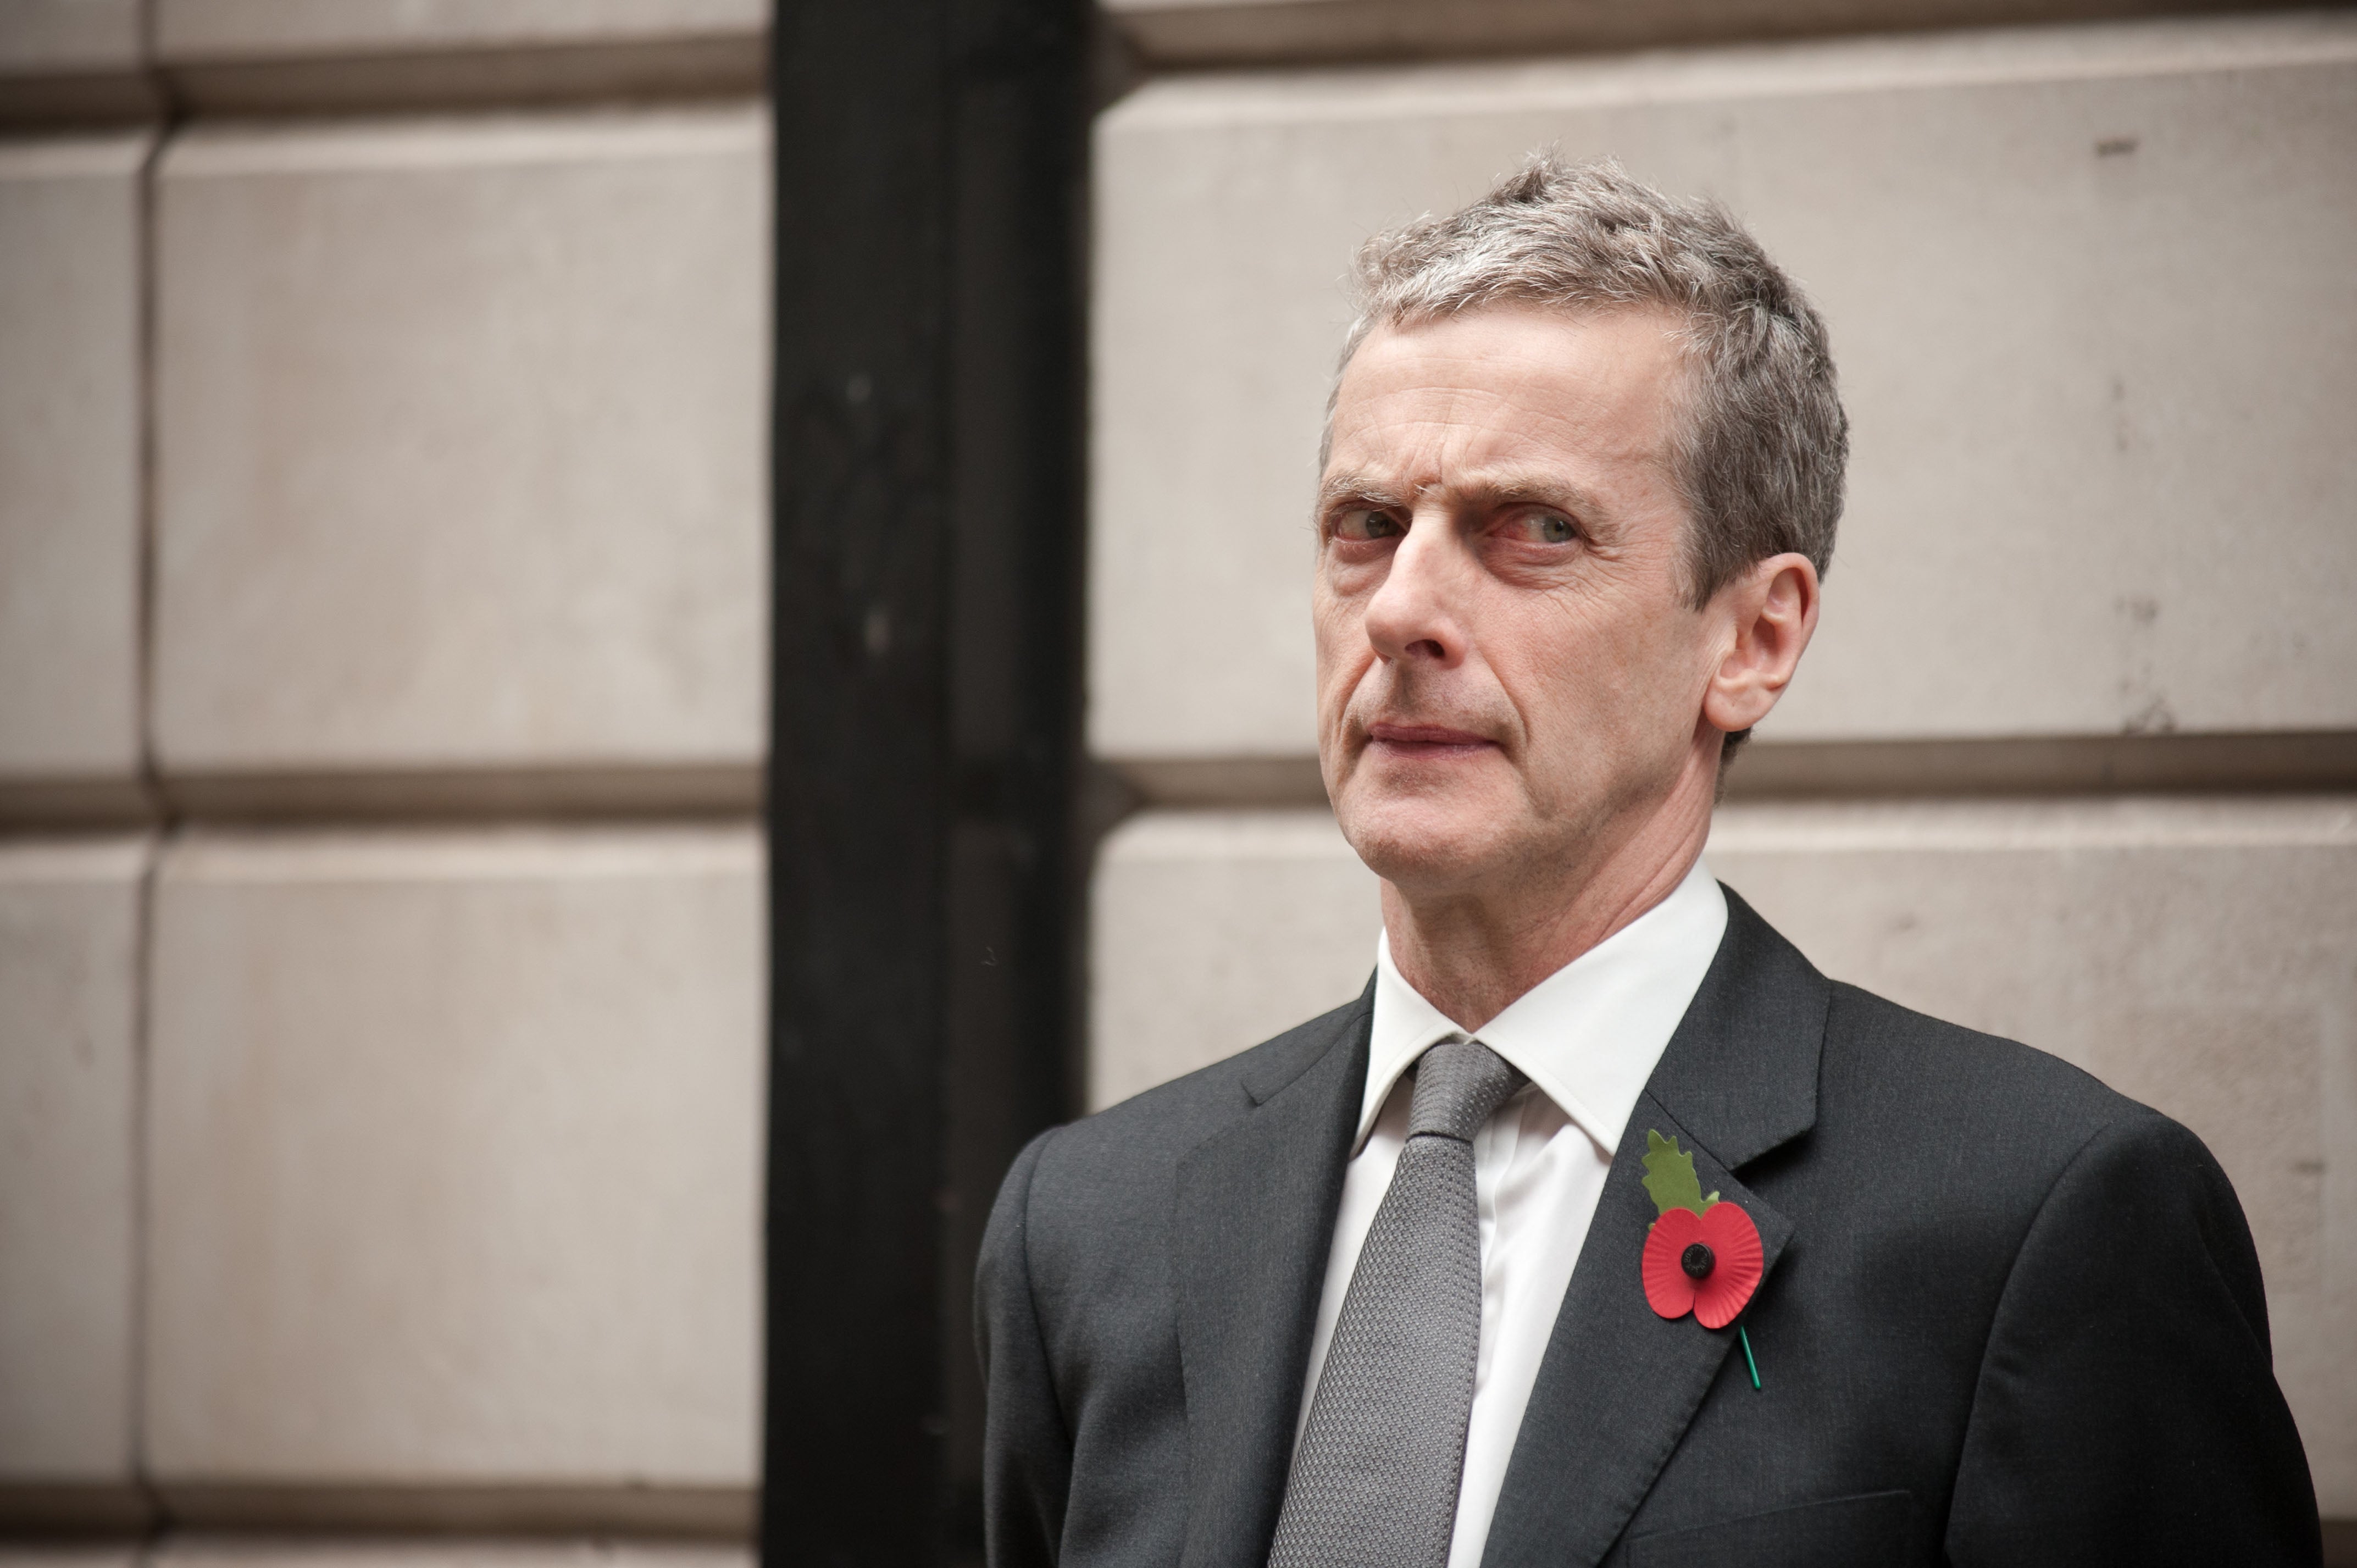 Malcolm Tucker, the foul-mouthed spin doctor in BBC’s ‘The Thick of It’, might have some choice words for such findings